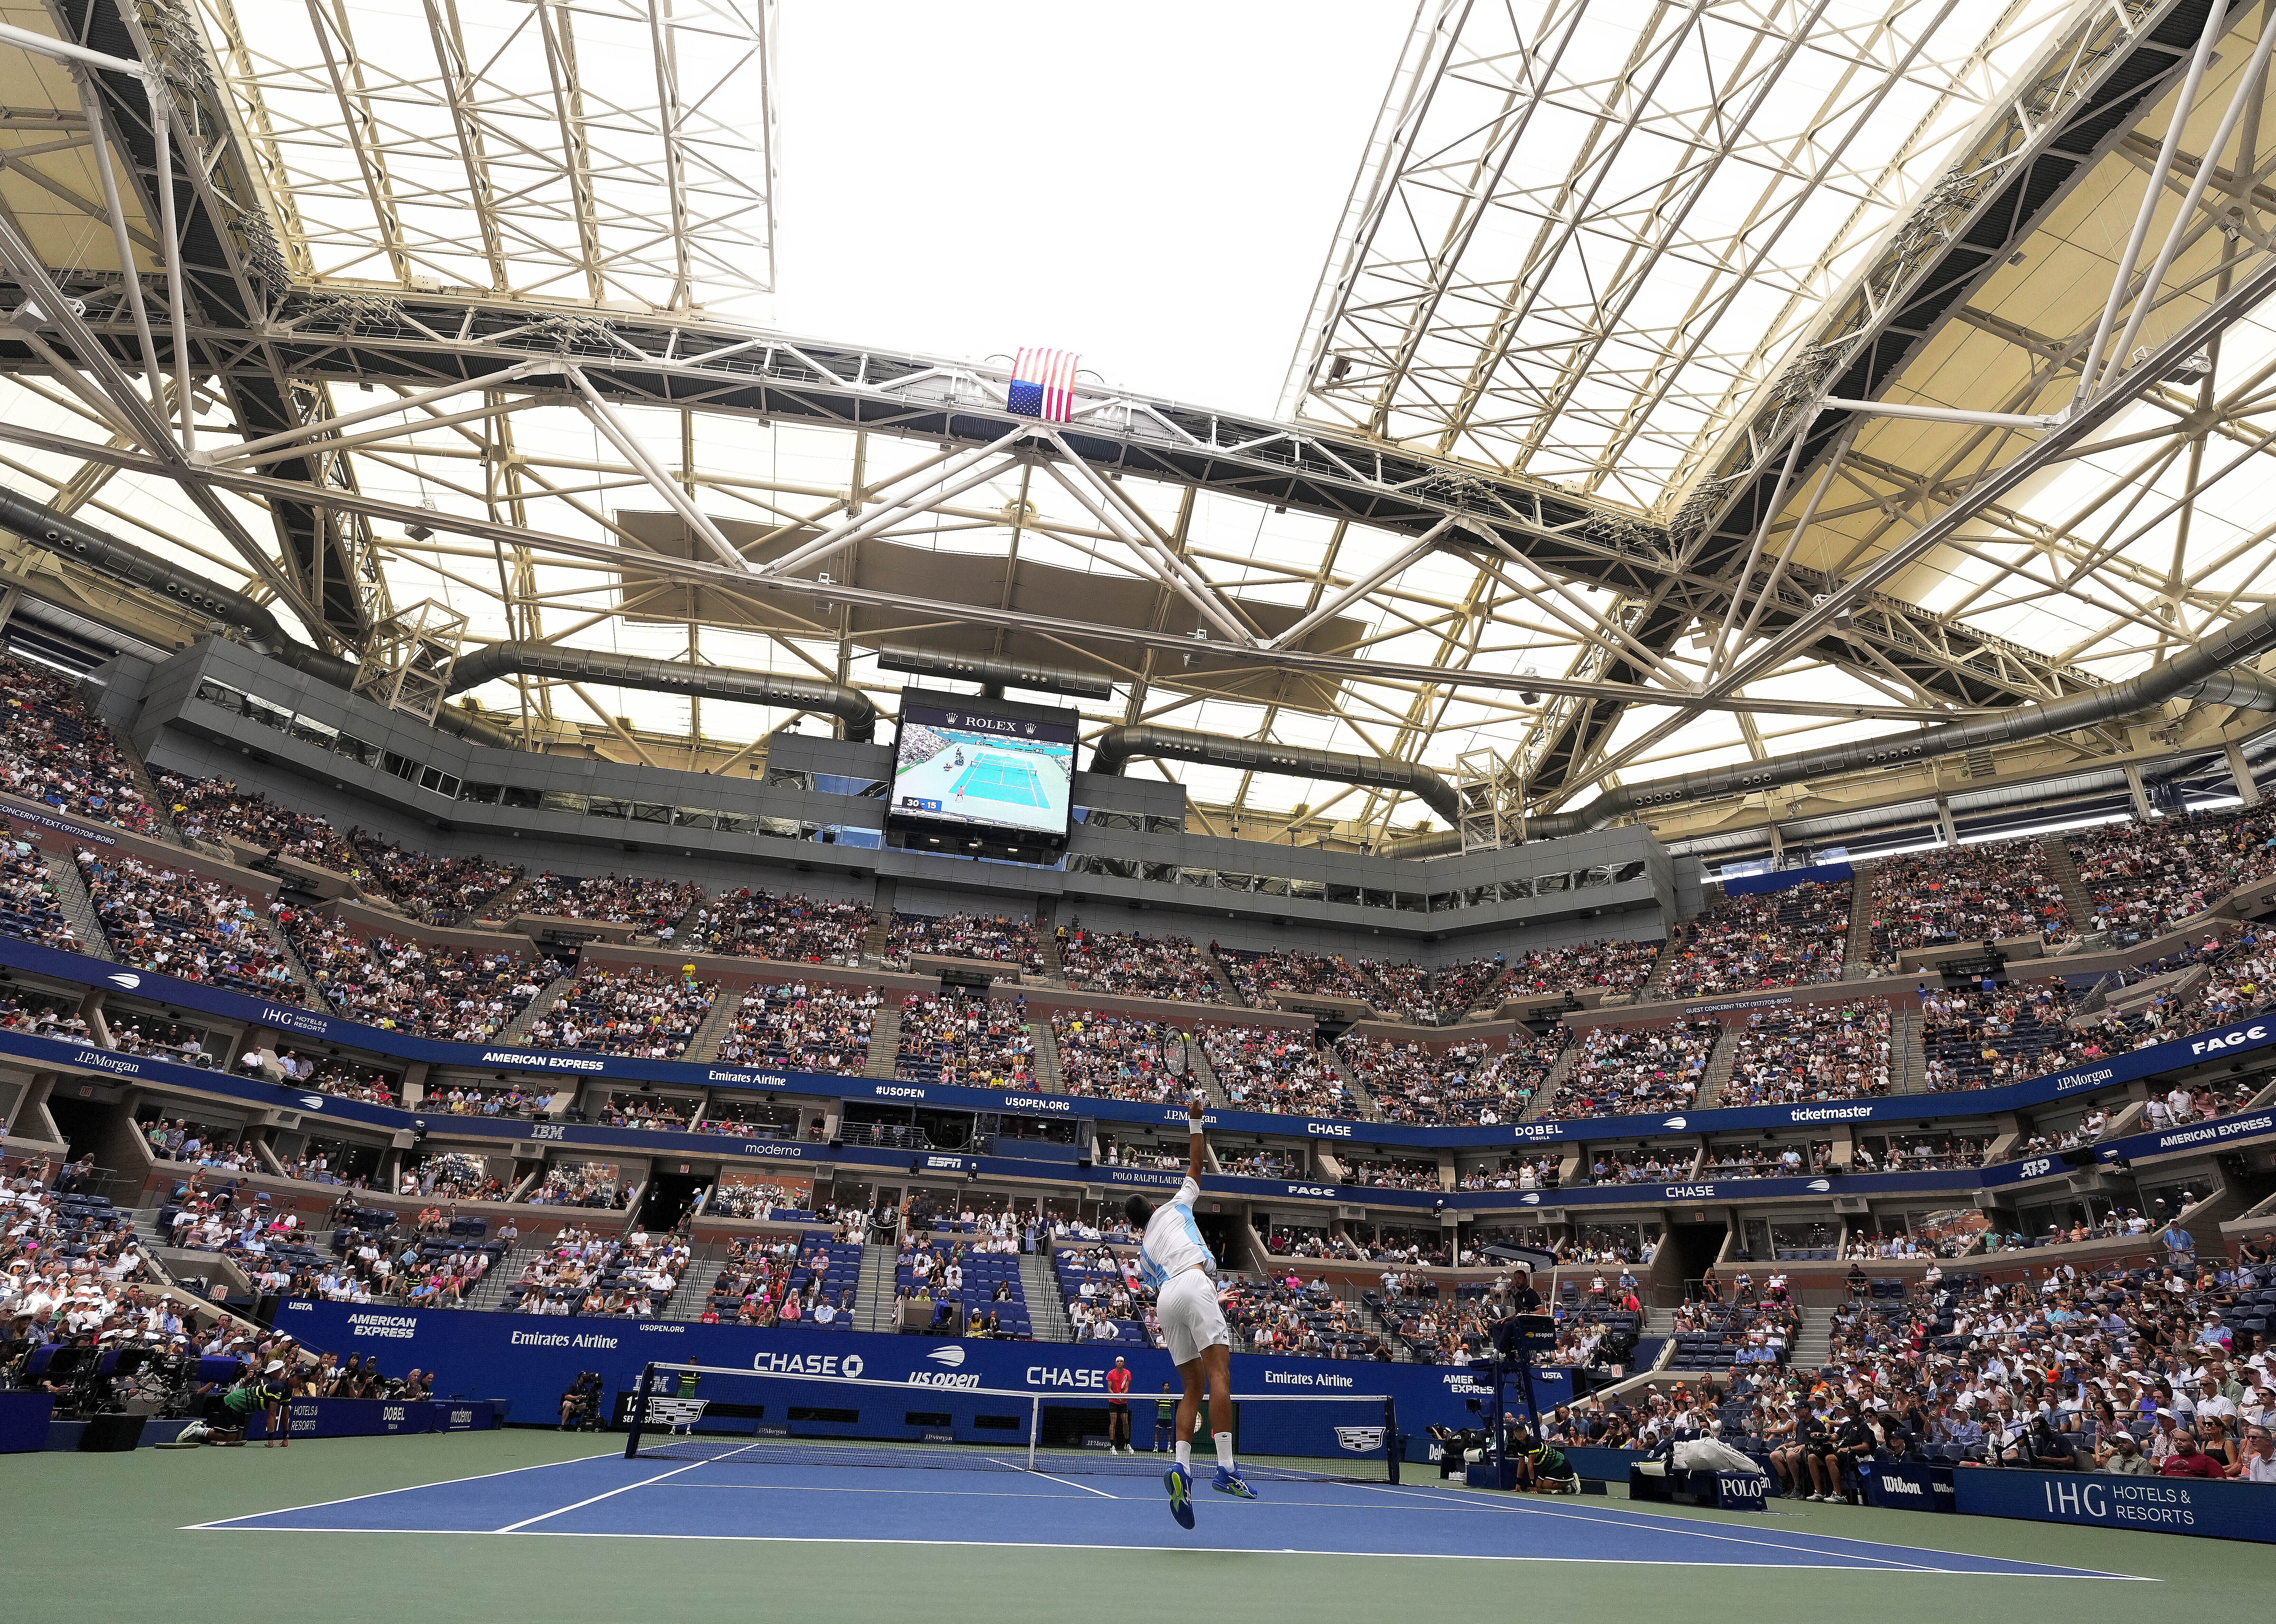 Two roofs at the US Open were partially shut because of rising heat and humidity